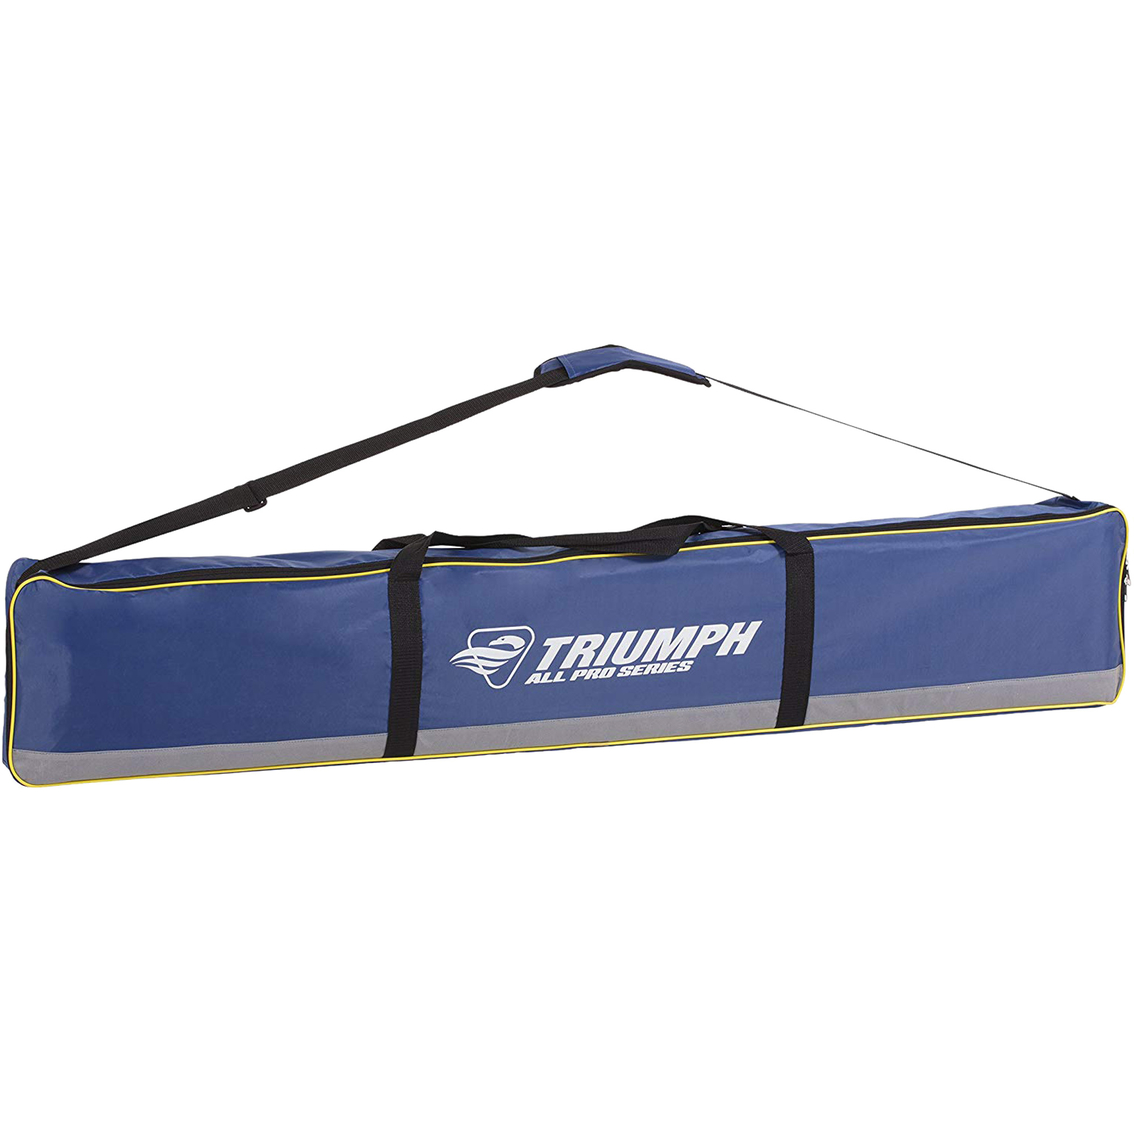 Triumph Sports Competition Volleyball Set - Image 2 of 4